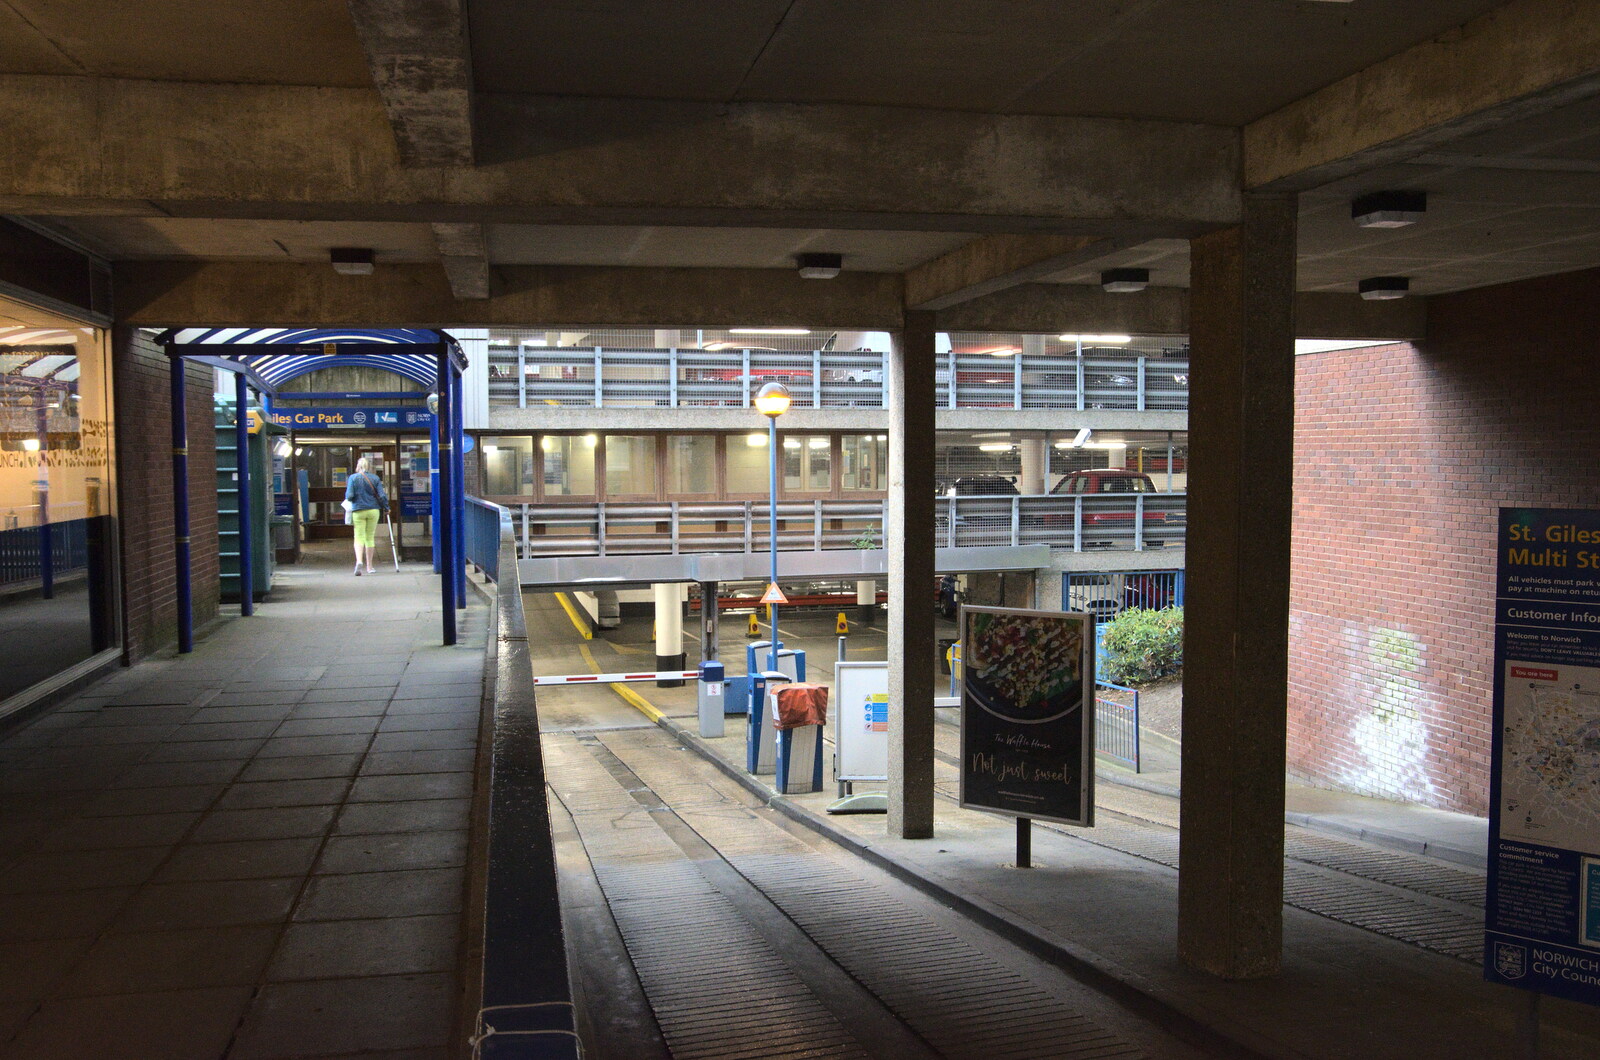 The underground world of St. Giles car park from Discovering the Hidden City: Norwich, Norfolk - 23rd May 2022